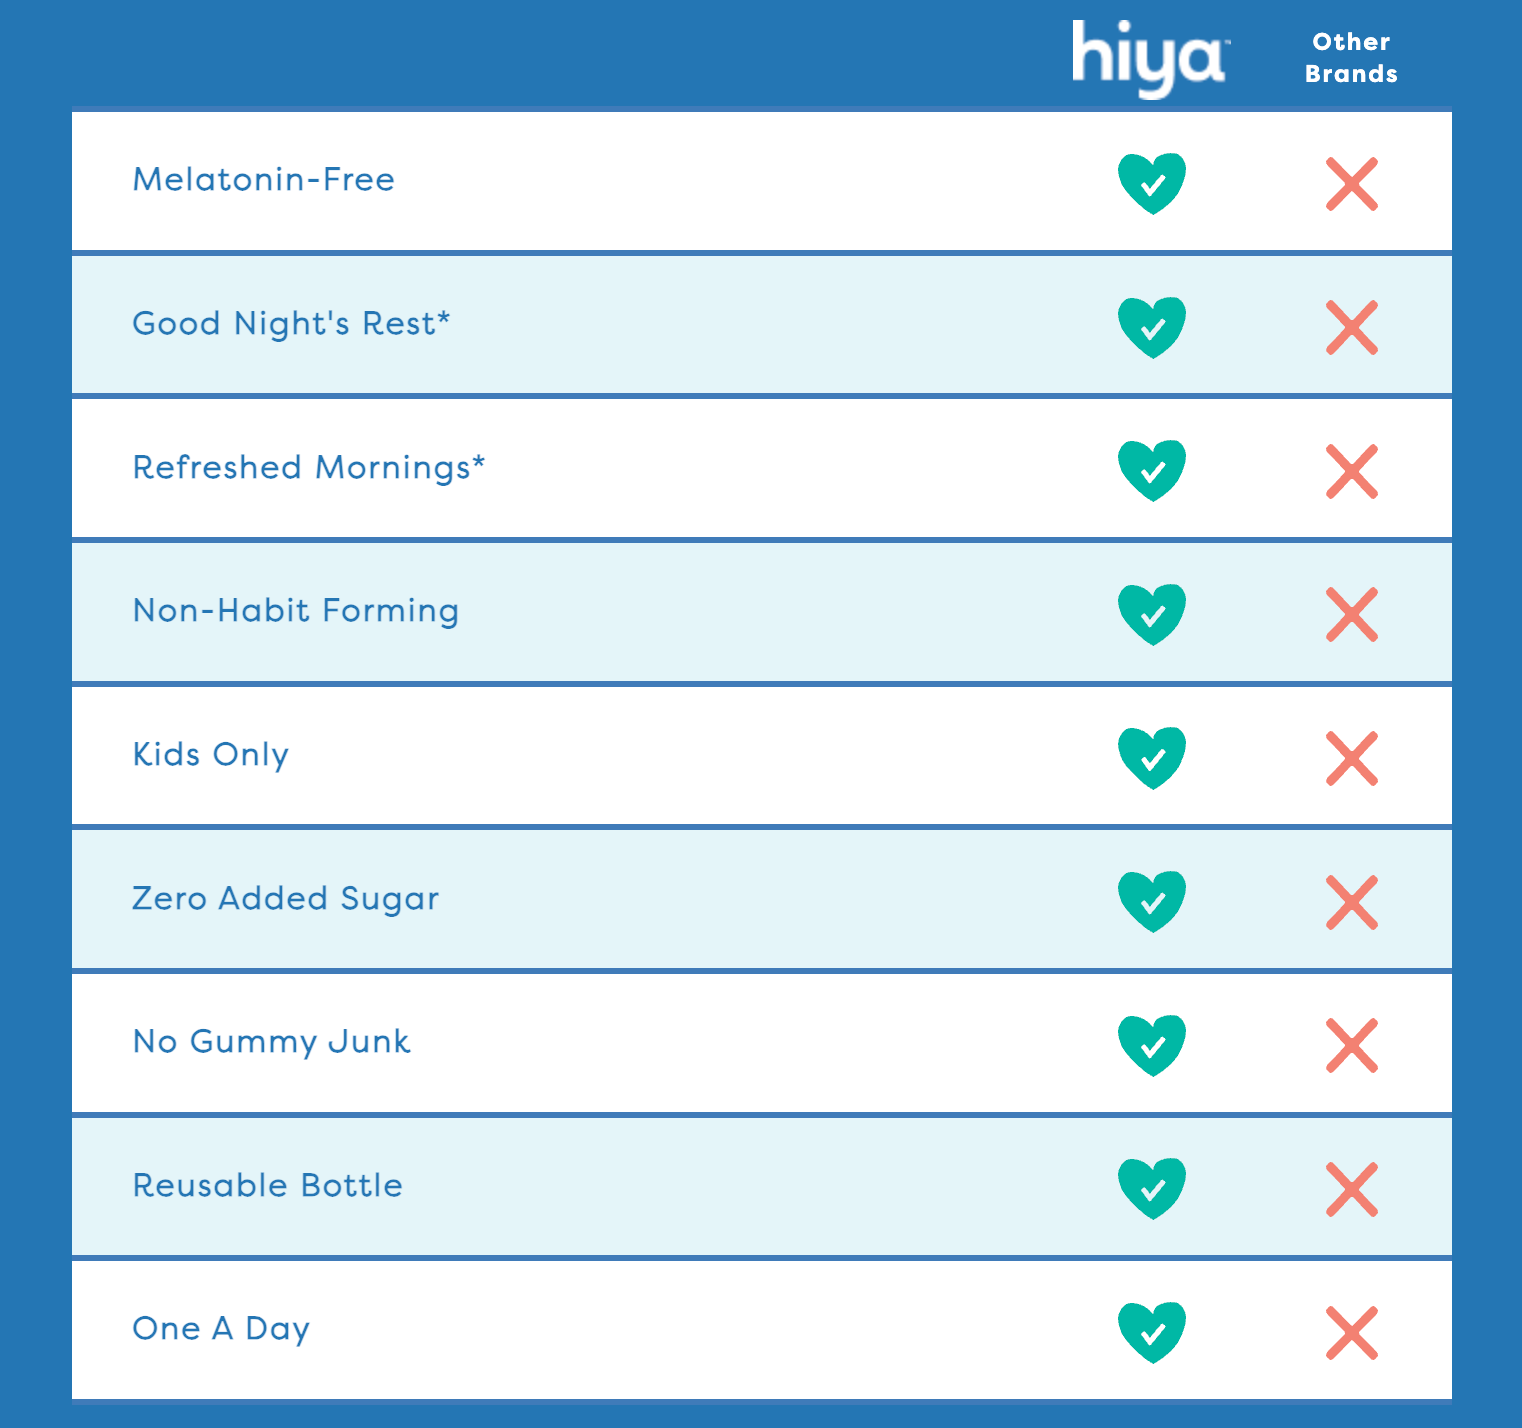 Comparison chart highlighting Hiya's Kids Bedtime Essentials as melatonin-free, supporting good night's rest and refreshed mornings, non-habit forming, designed for kids, with zero added sugar, no gummy junk, and comes in a reusable bottle, in contrast to other brands.